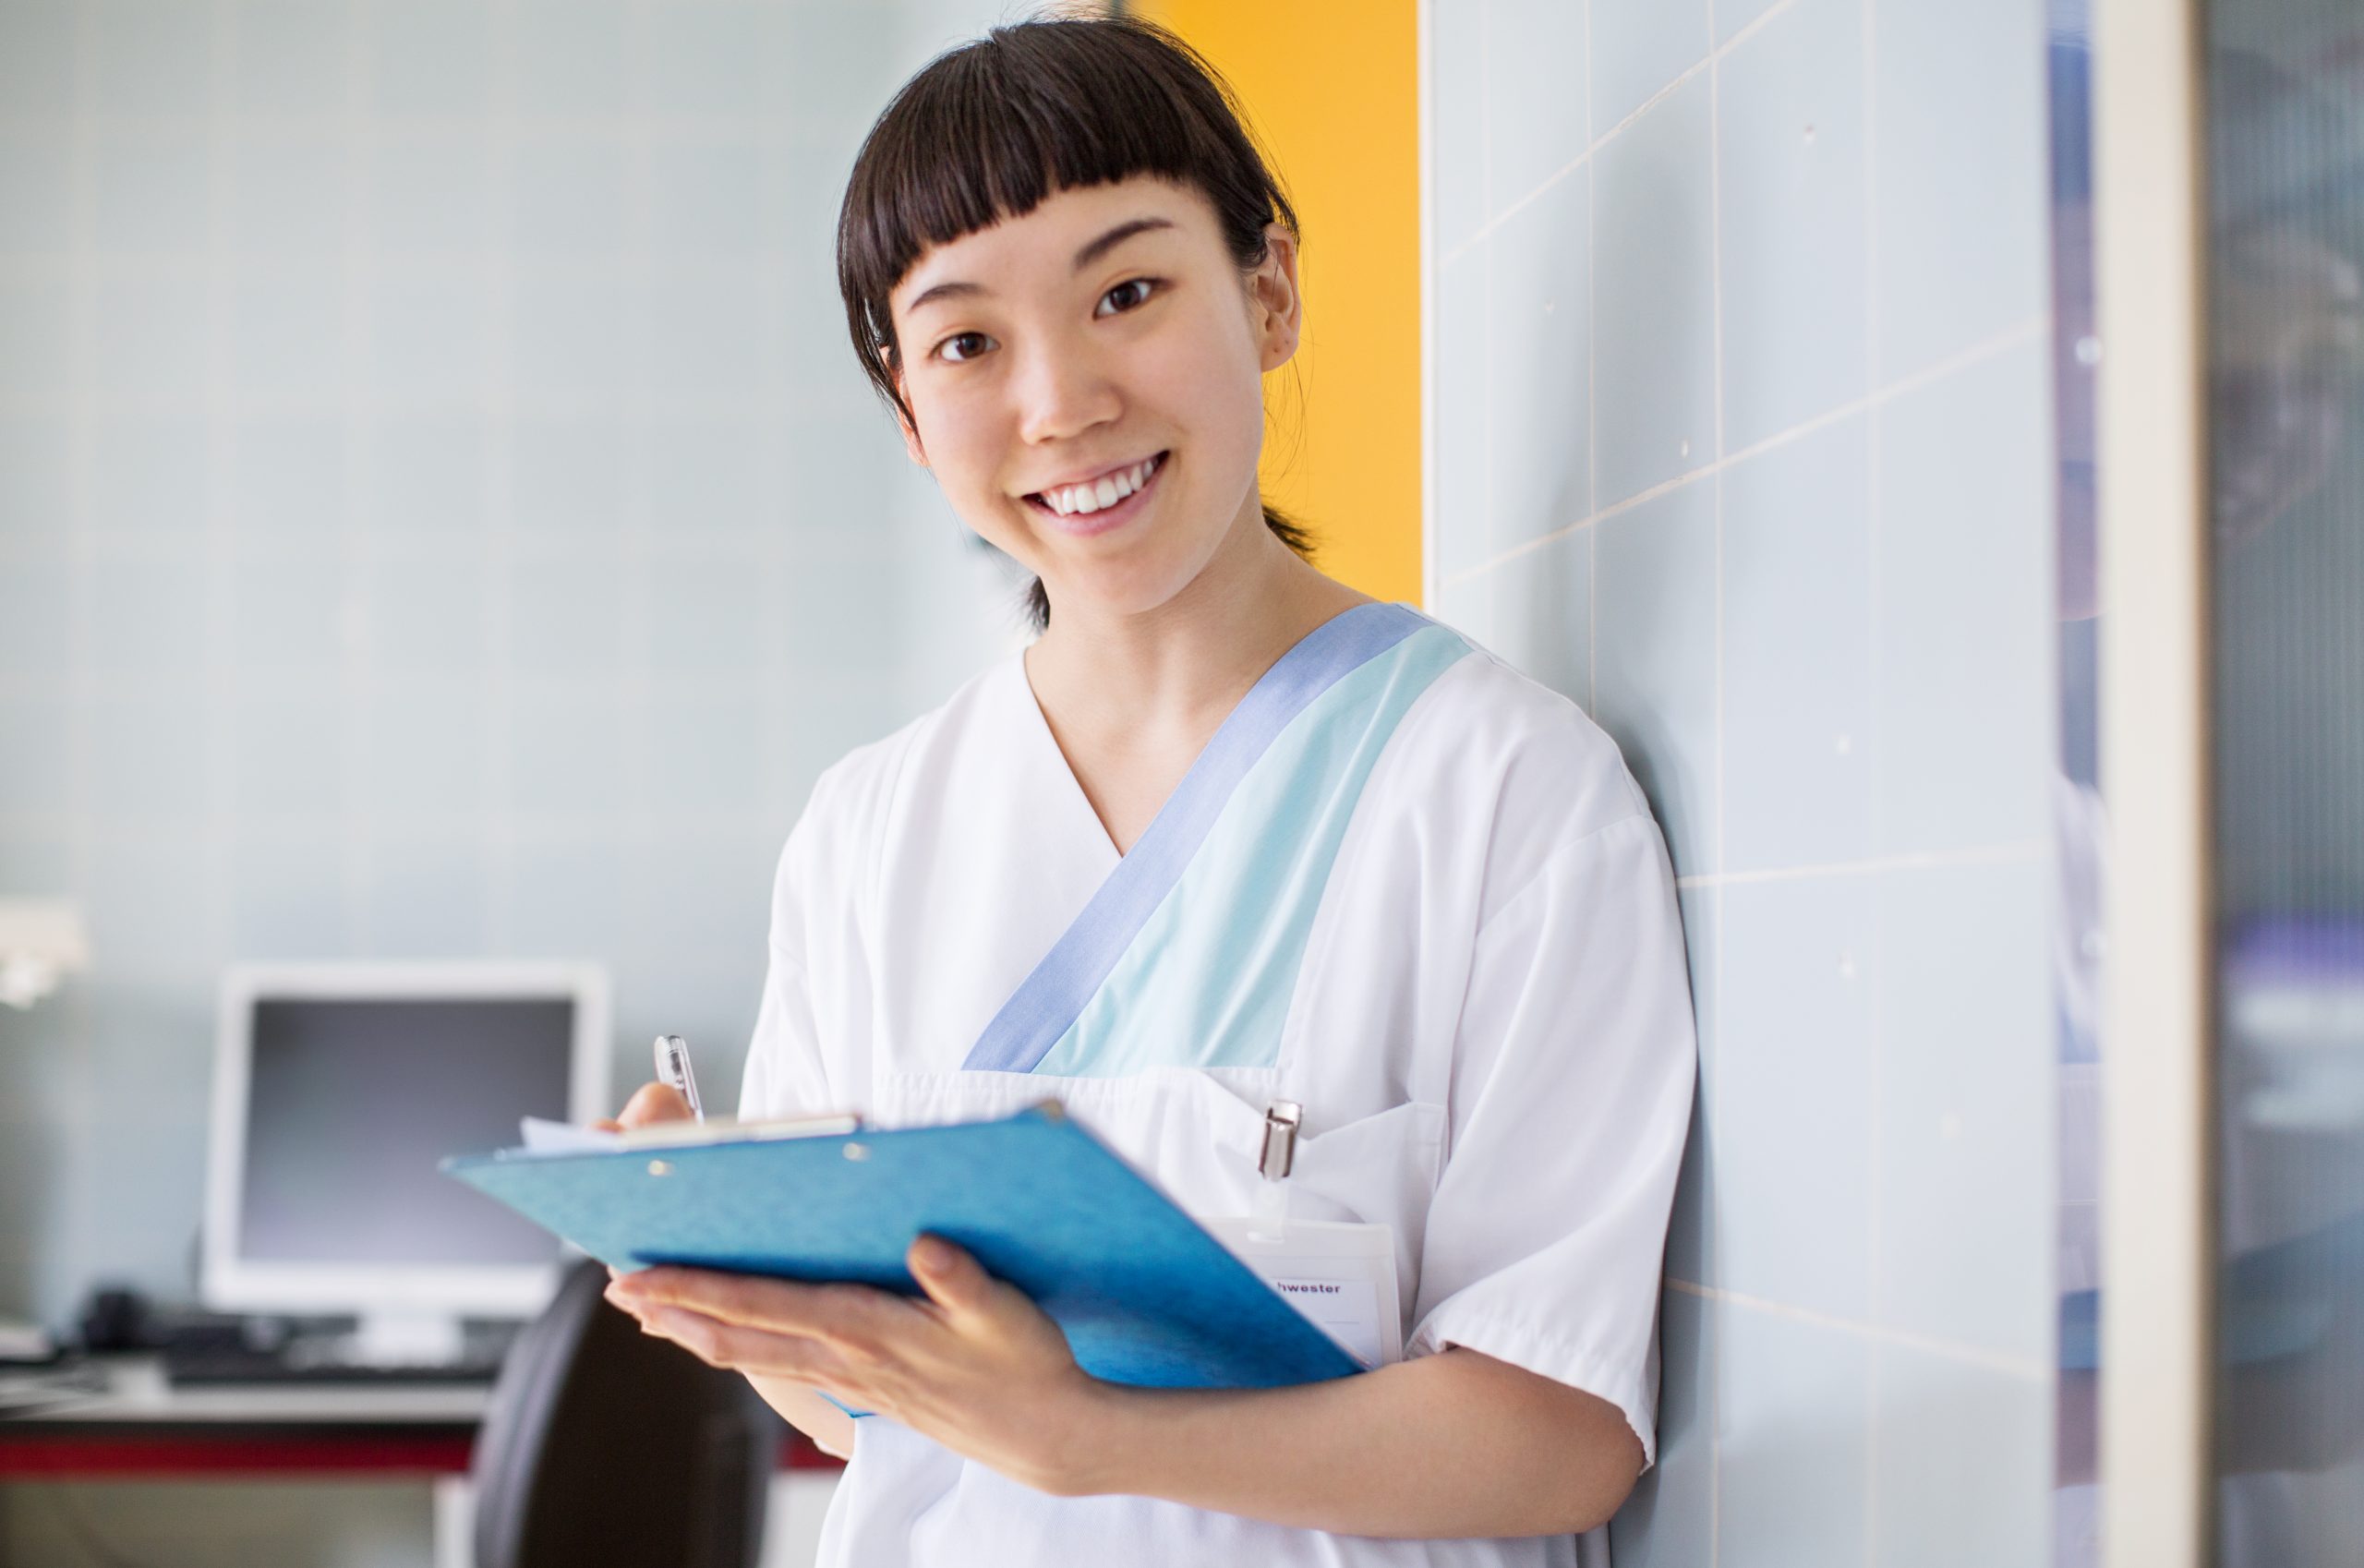 Female medical professional working in clinic holding clipboard and writing patient history. Smiling nurse writing medical report at hospital